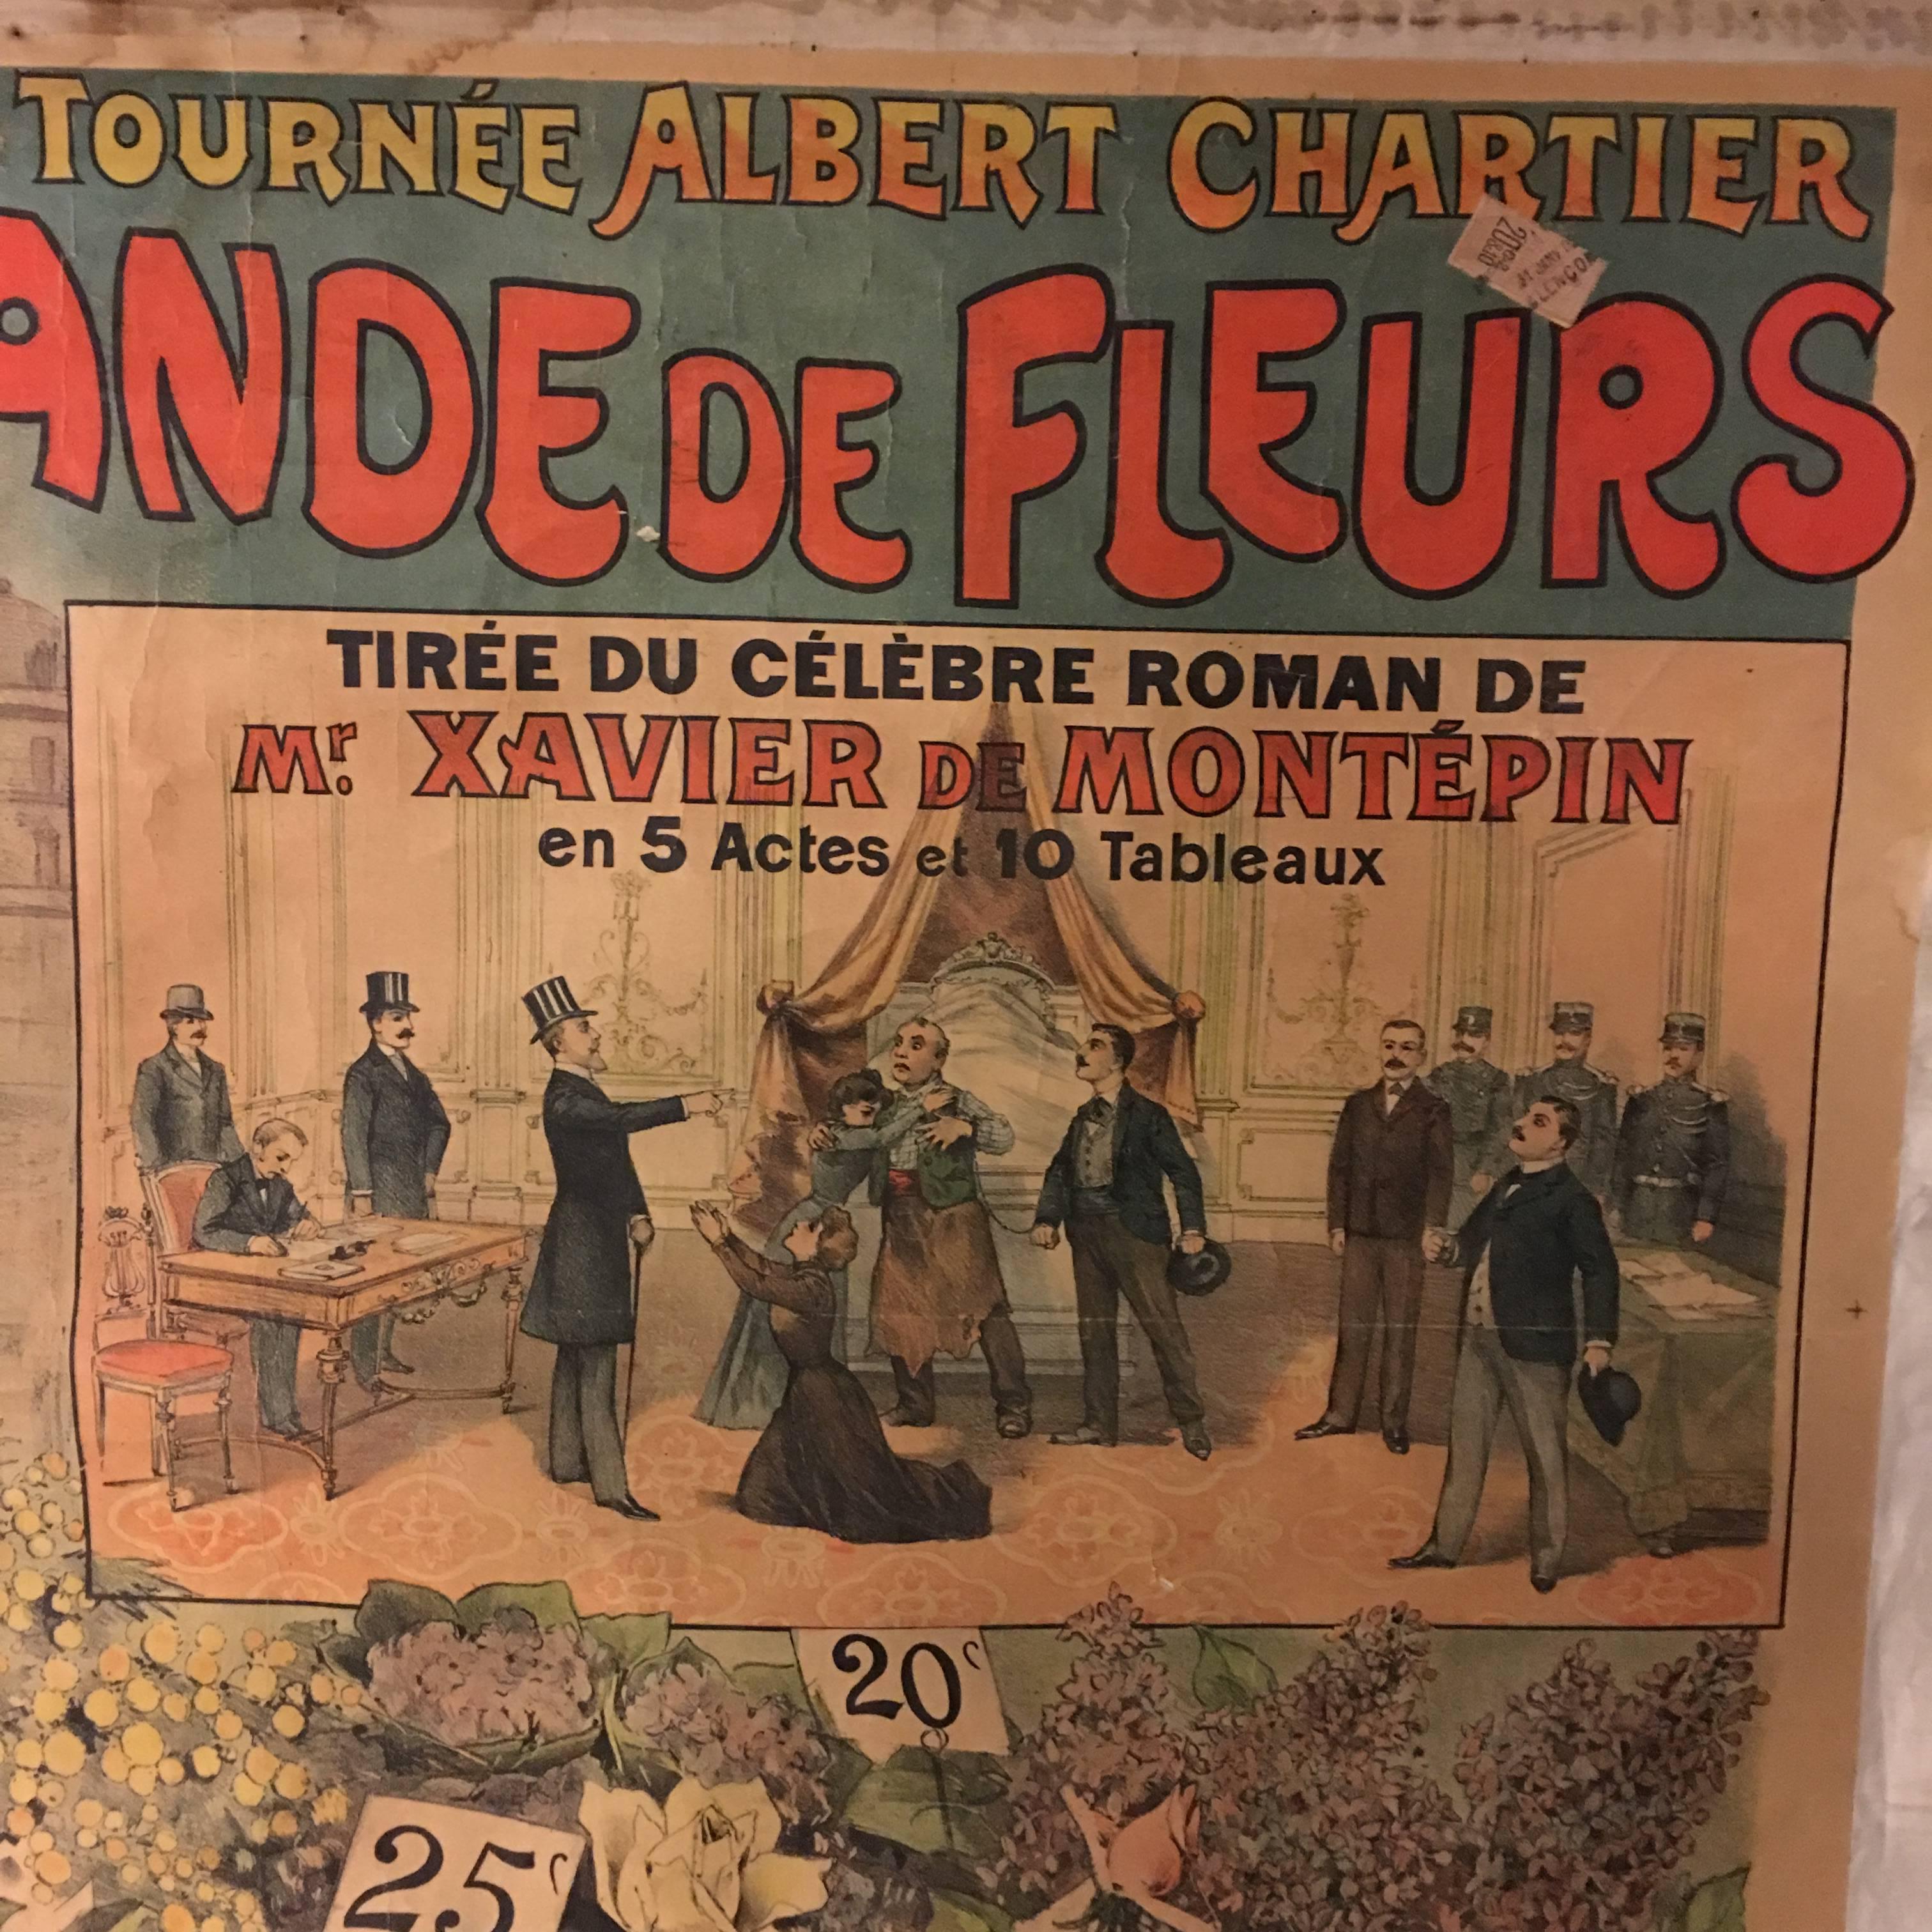 French Antique Theater Poster, Paris, France, 1902